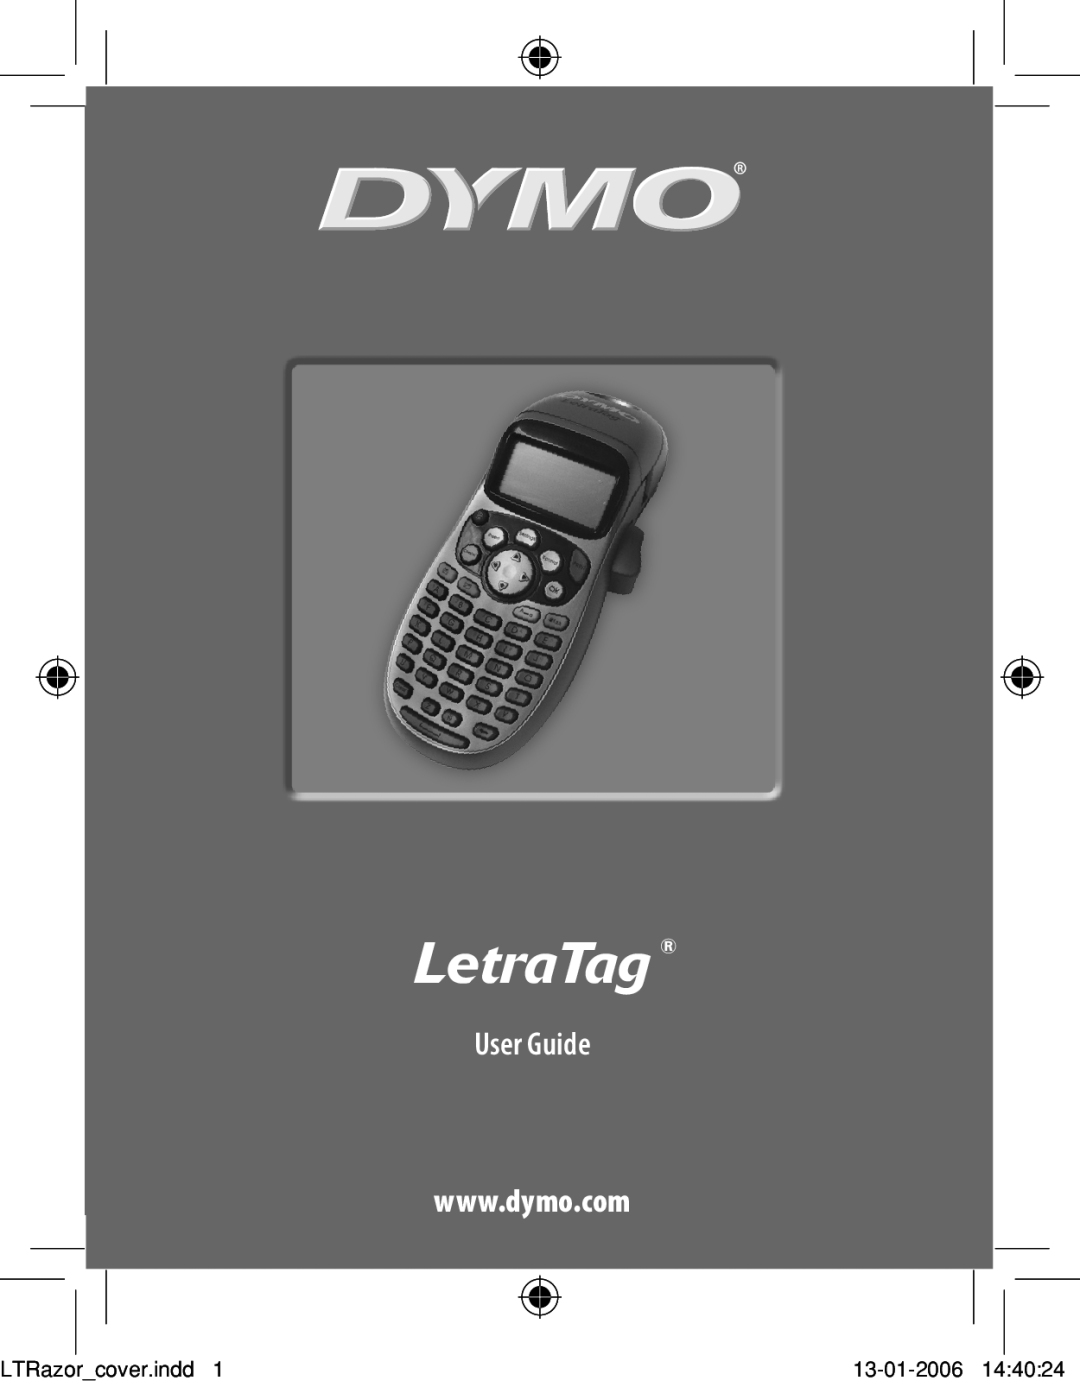 Dymo Labelmaker manual LetraTag, User Guide, LTRazorcover.indd, 13-01-2006 